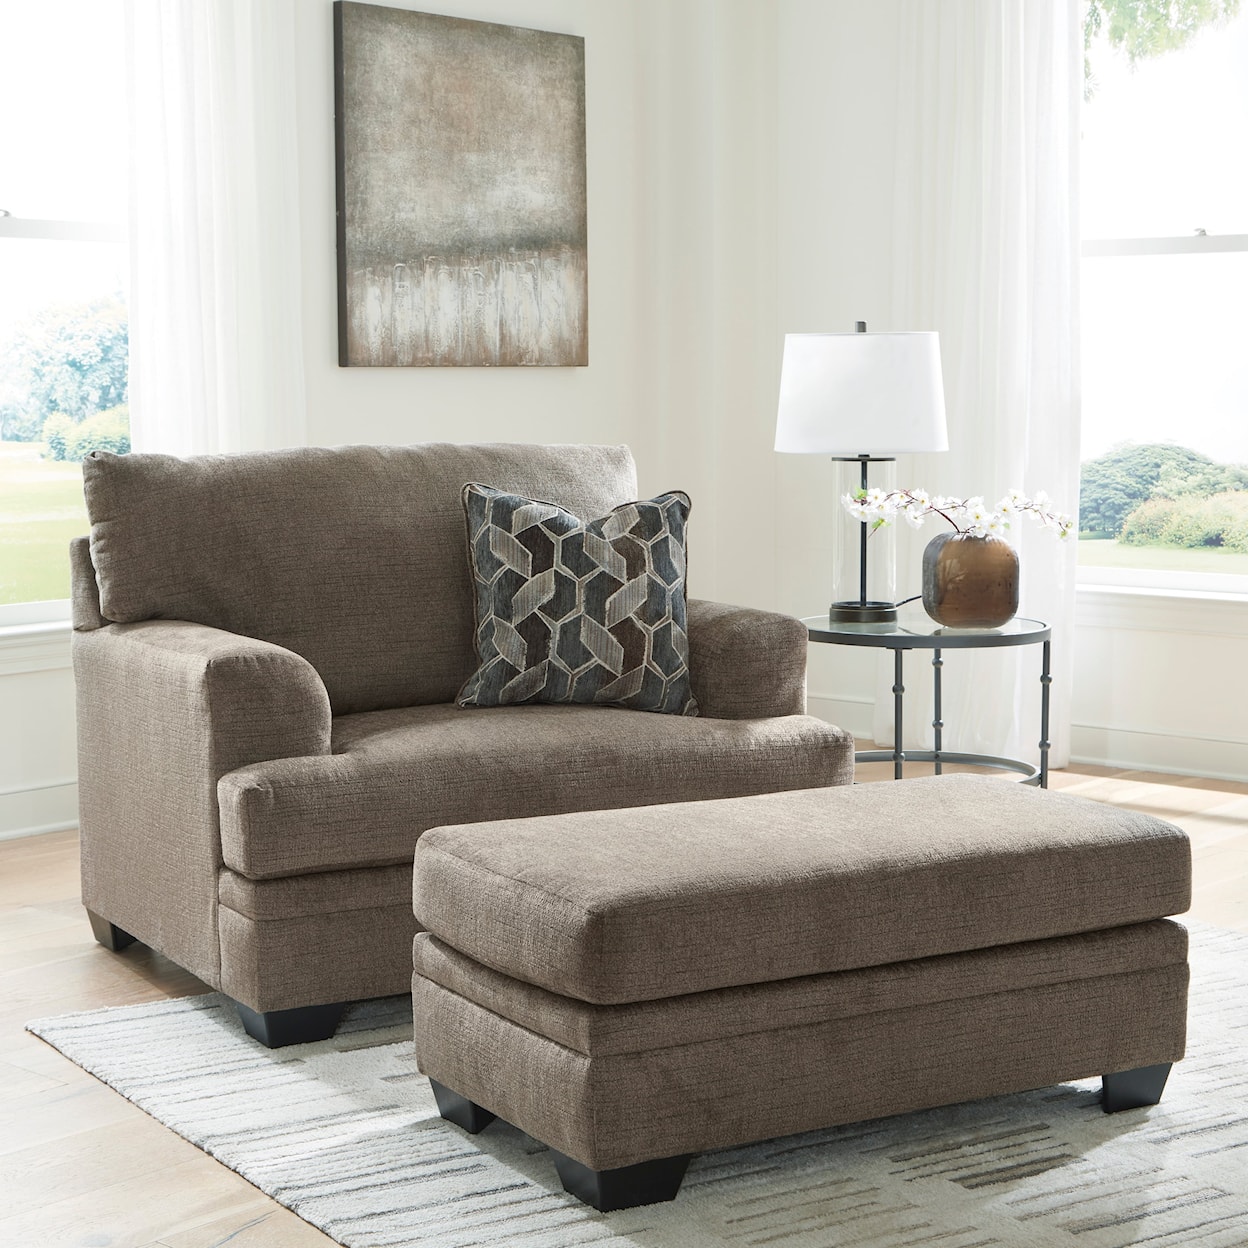 Ashley Signature Design Stonemeade Oversized Chair and Ottoman